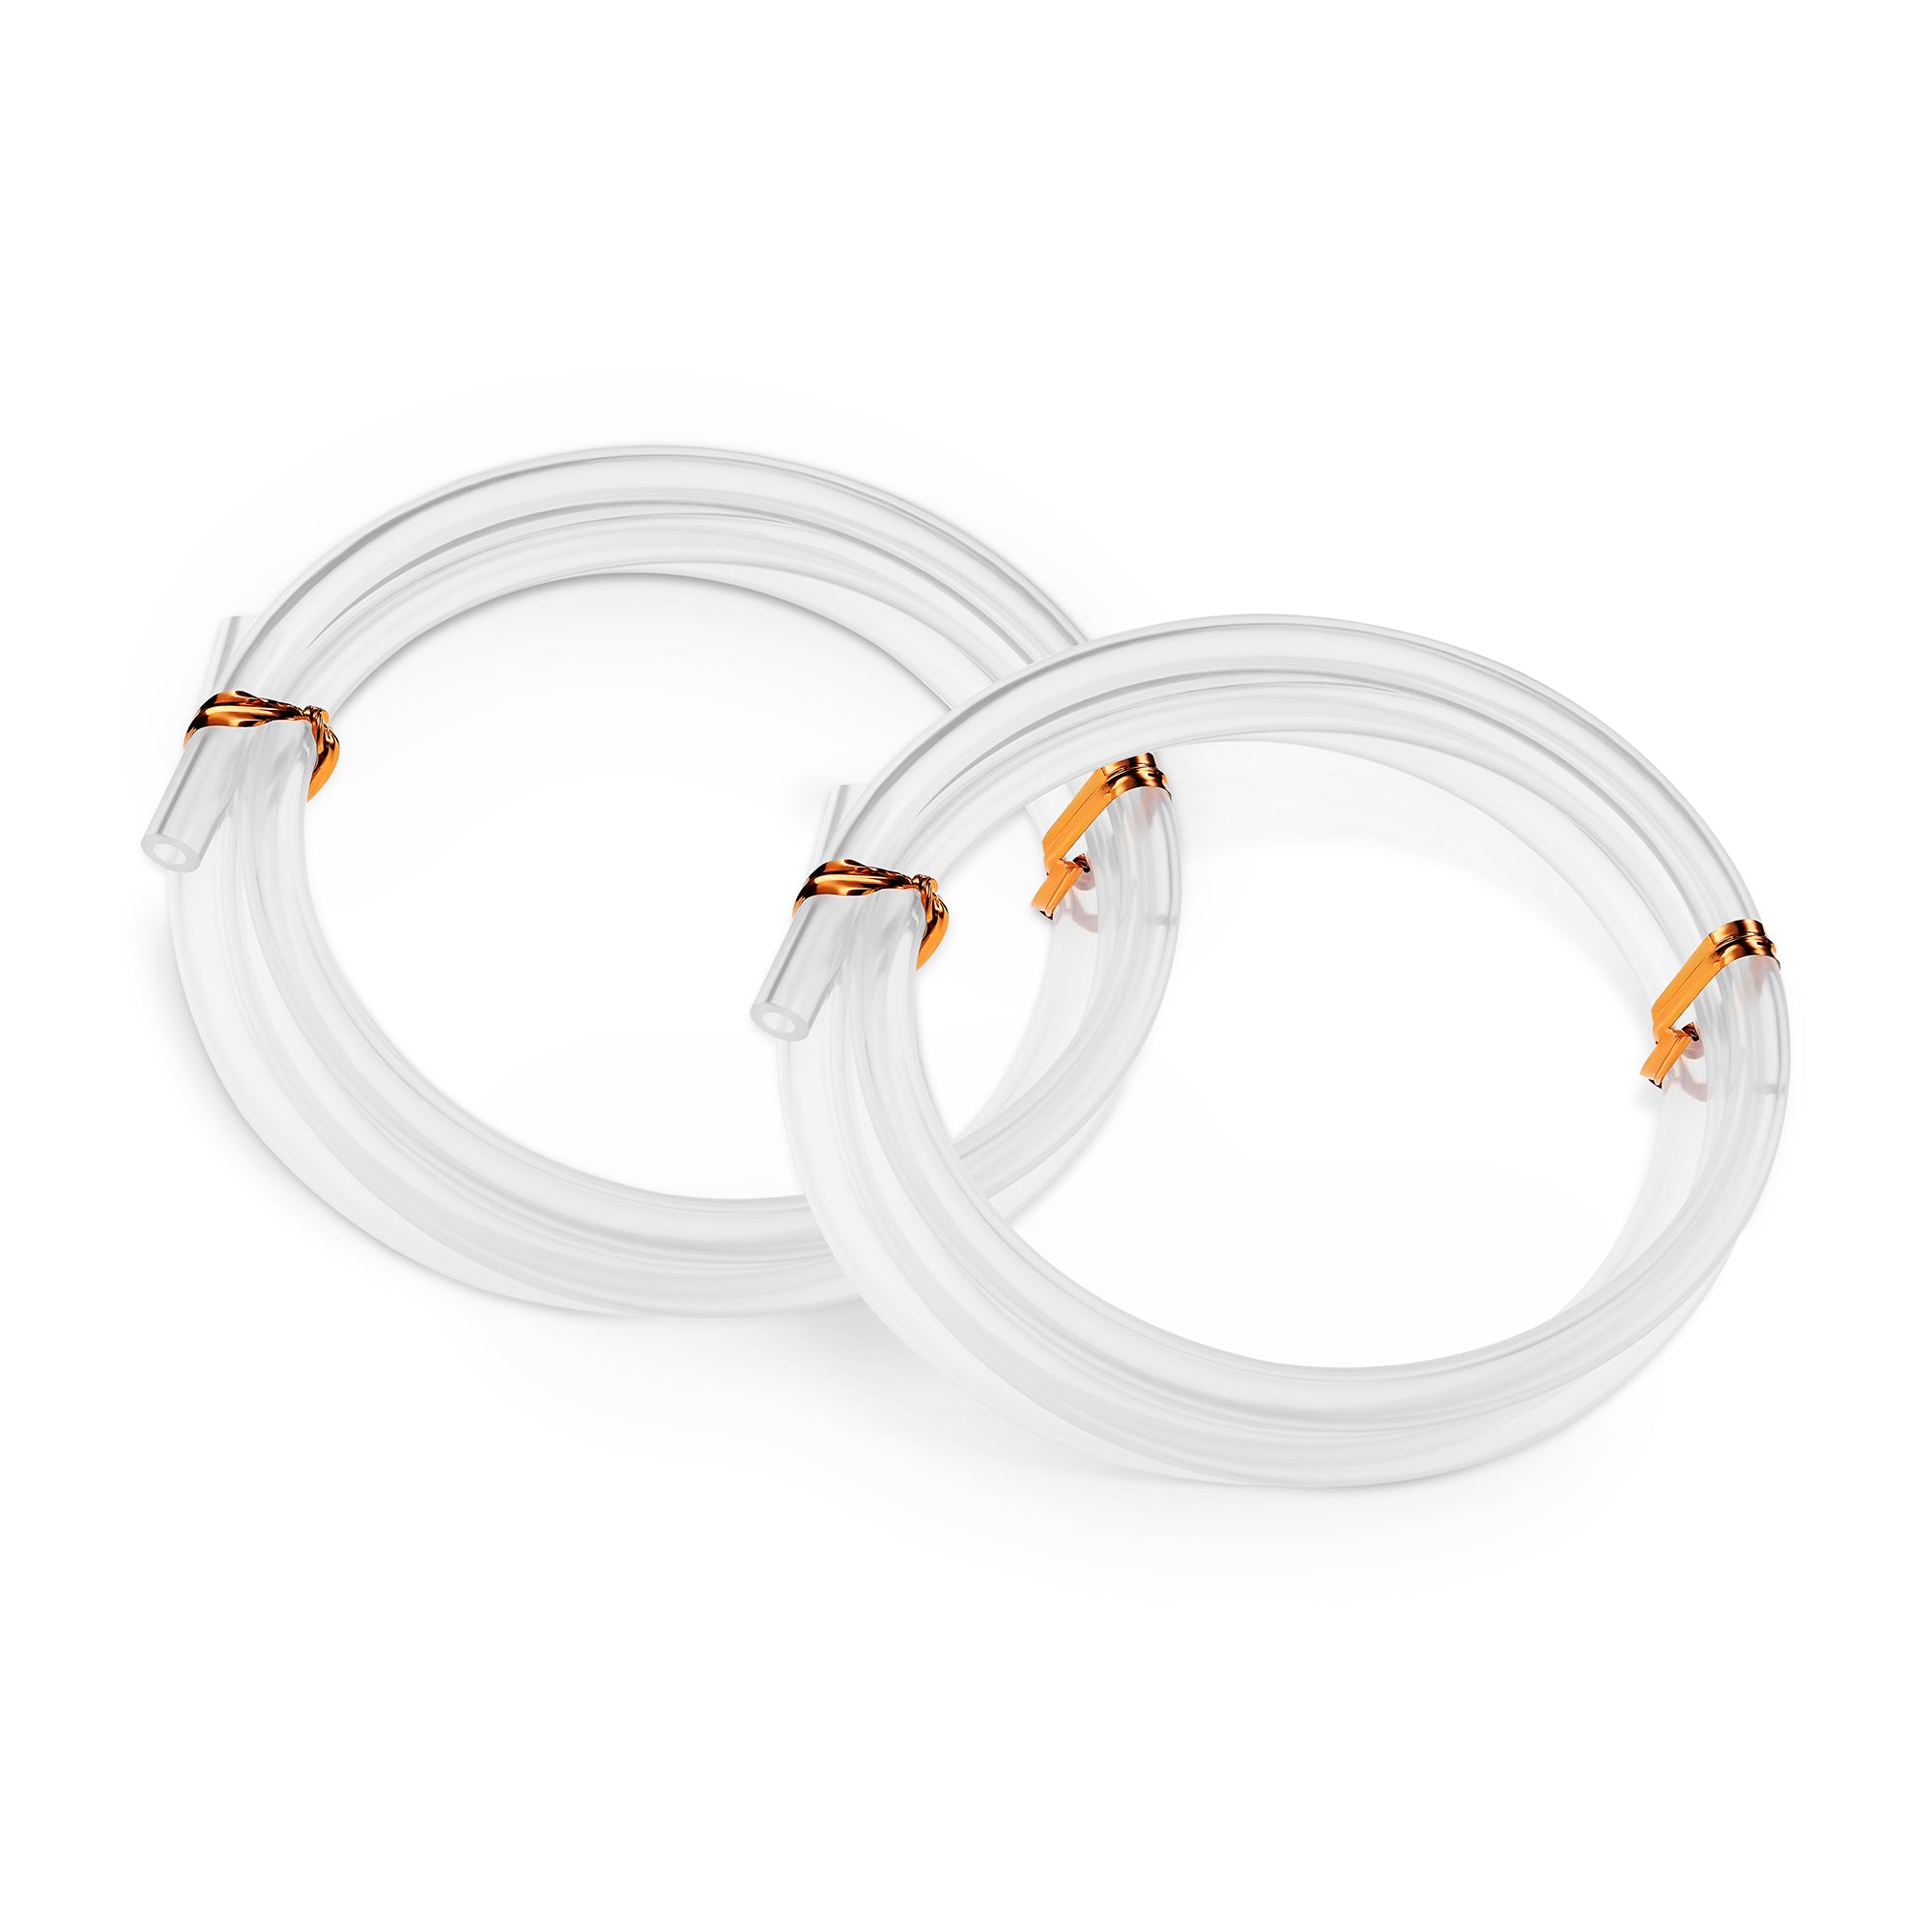 Spectra® CaraCups Wearable Milk Collection Hands-Free Inserts - 28mm